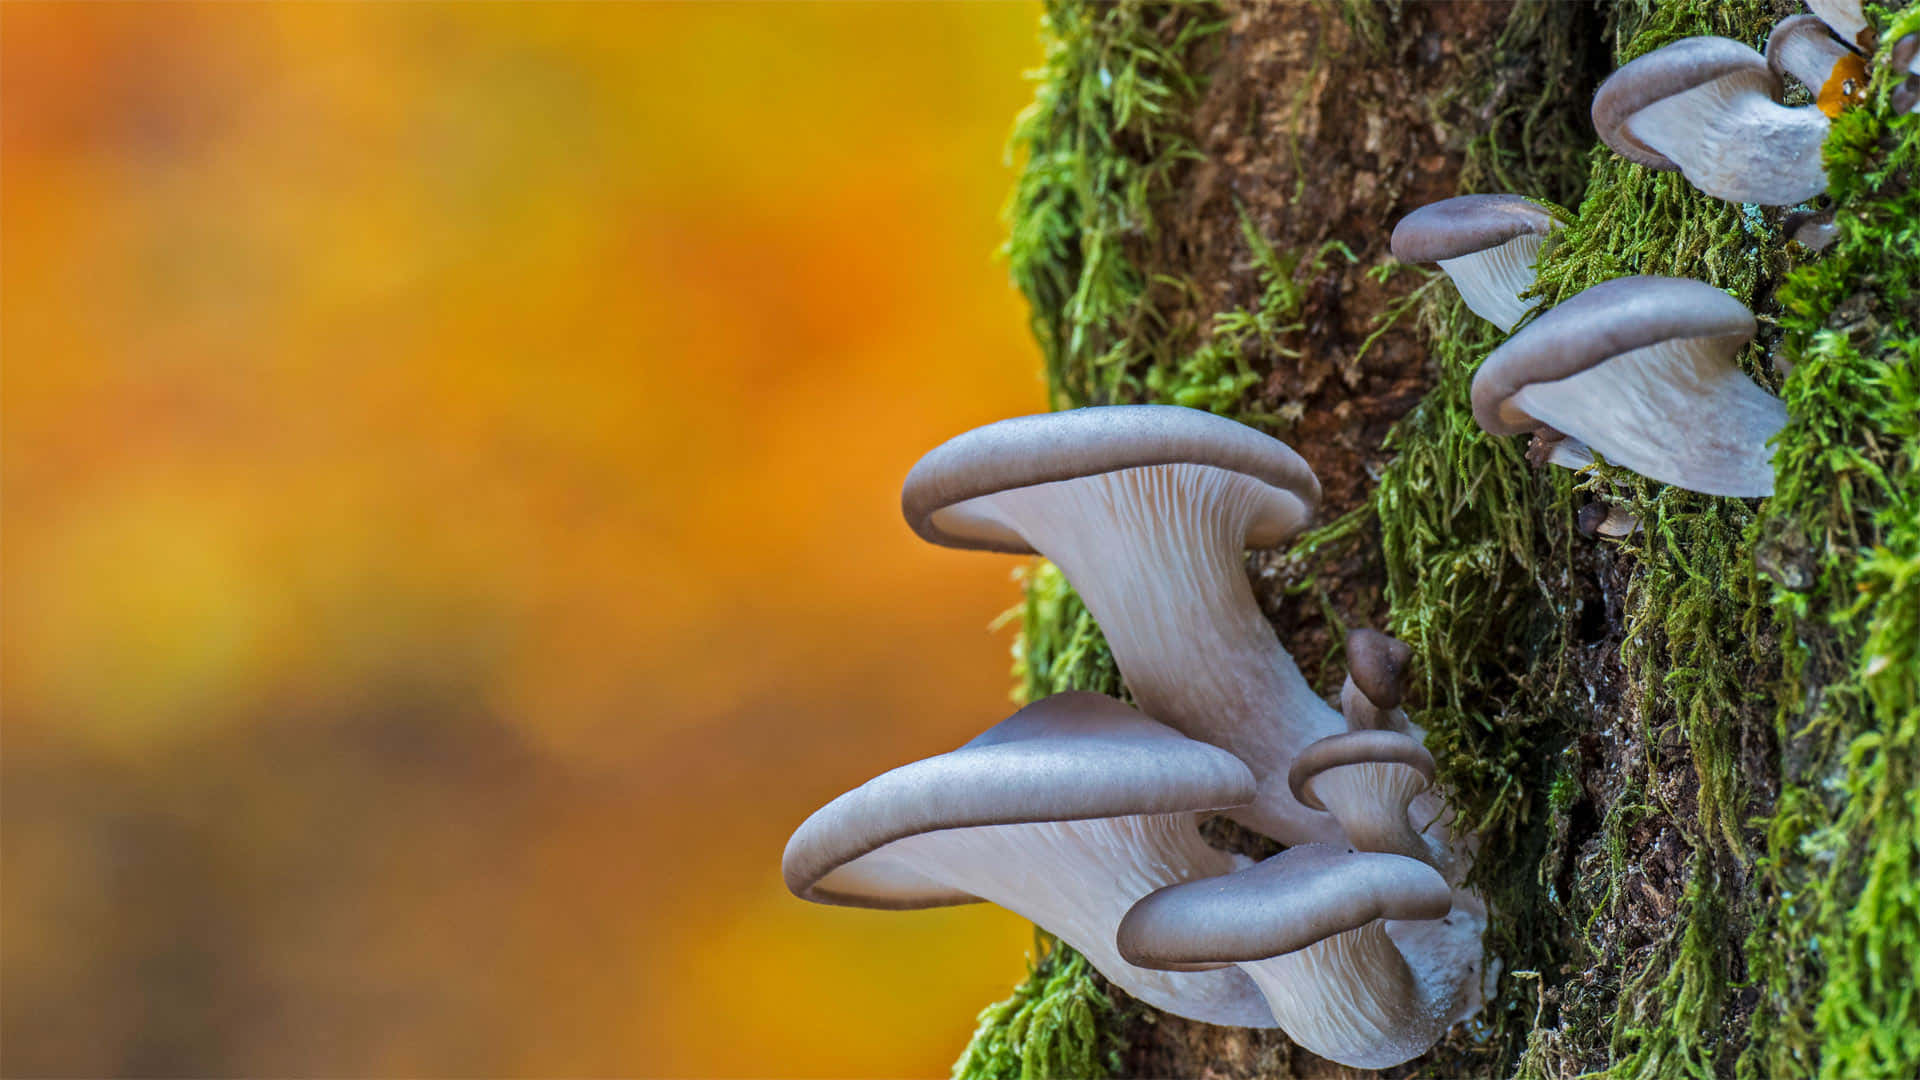 King Trumpet Mushroom Fungus On Mossy Branch Picture